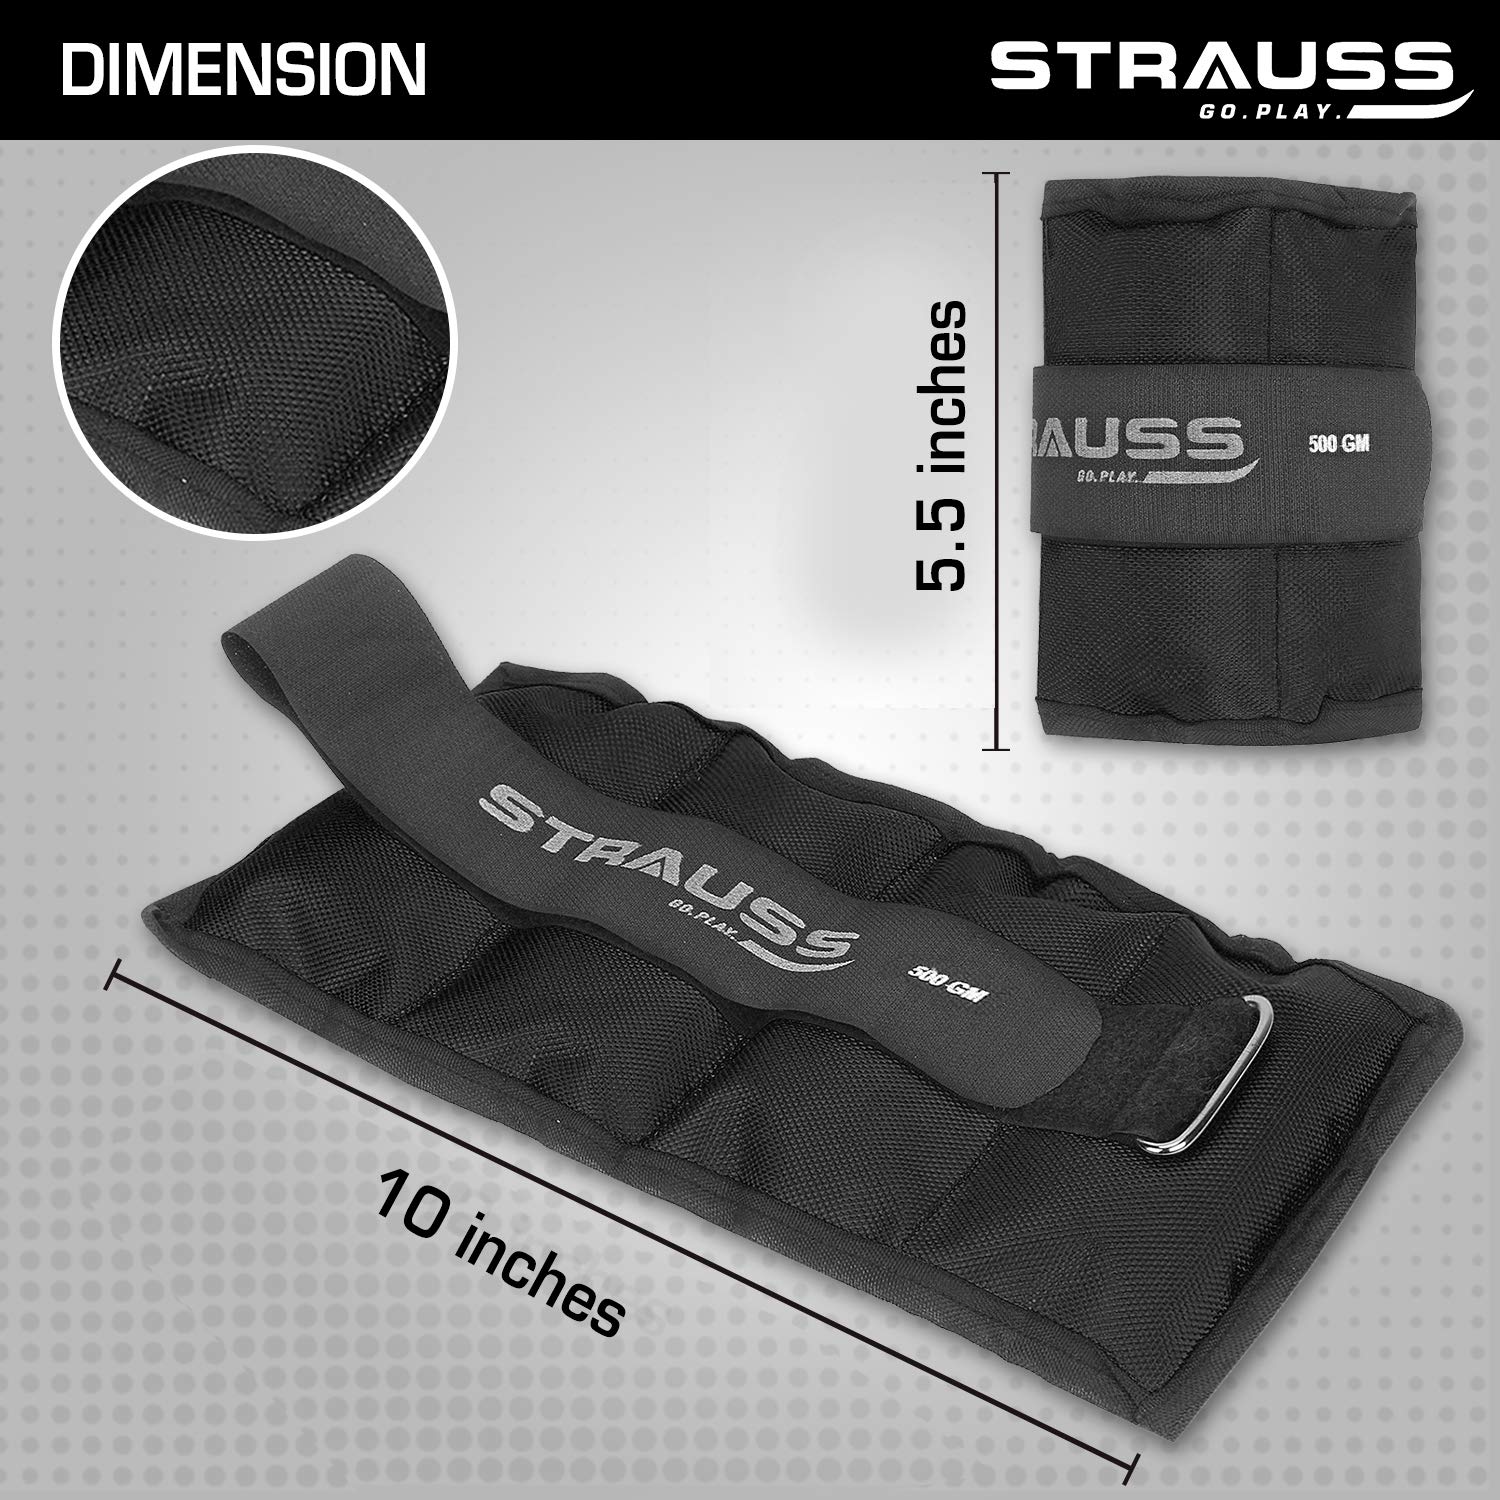 Strauss Adjustable Ankle/Wrist Weights 0.5 KG X 2 | Ideal for Walking, Running, Jogging, Cycling, Gym, Workout & Strength Training | Easy to Use on Ankle, Wrist, Leg, (Black)